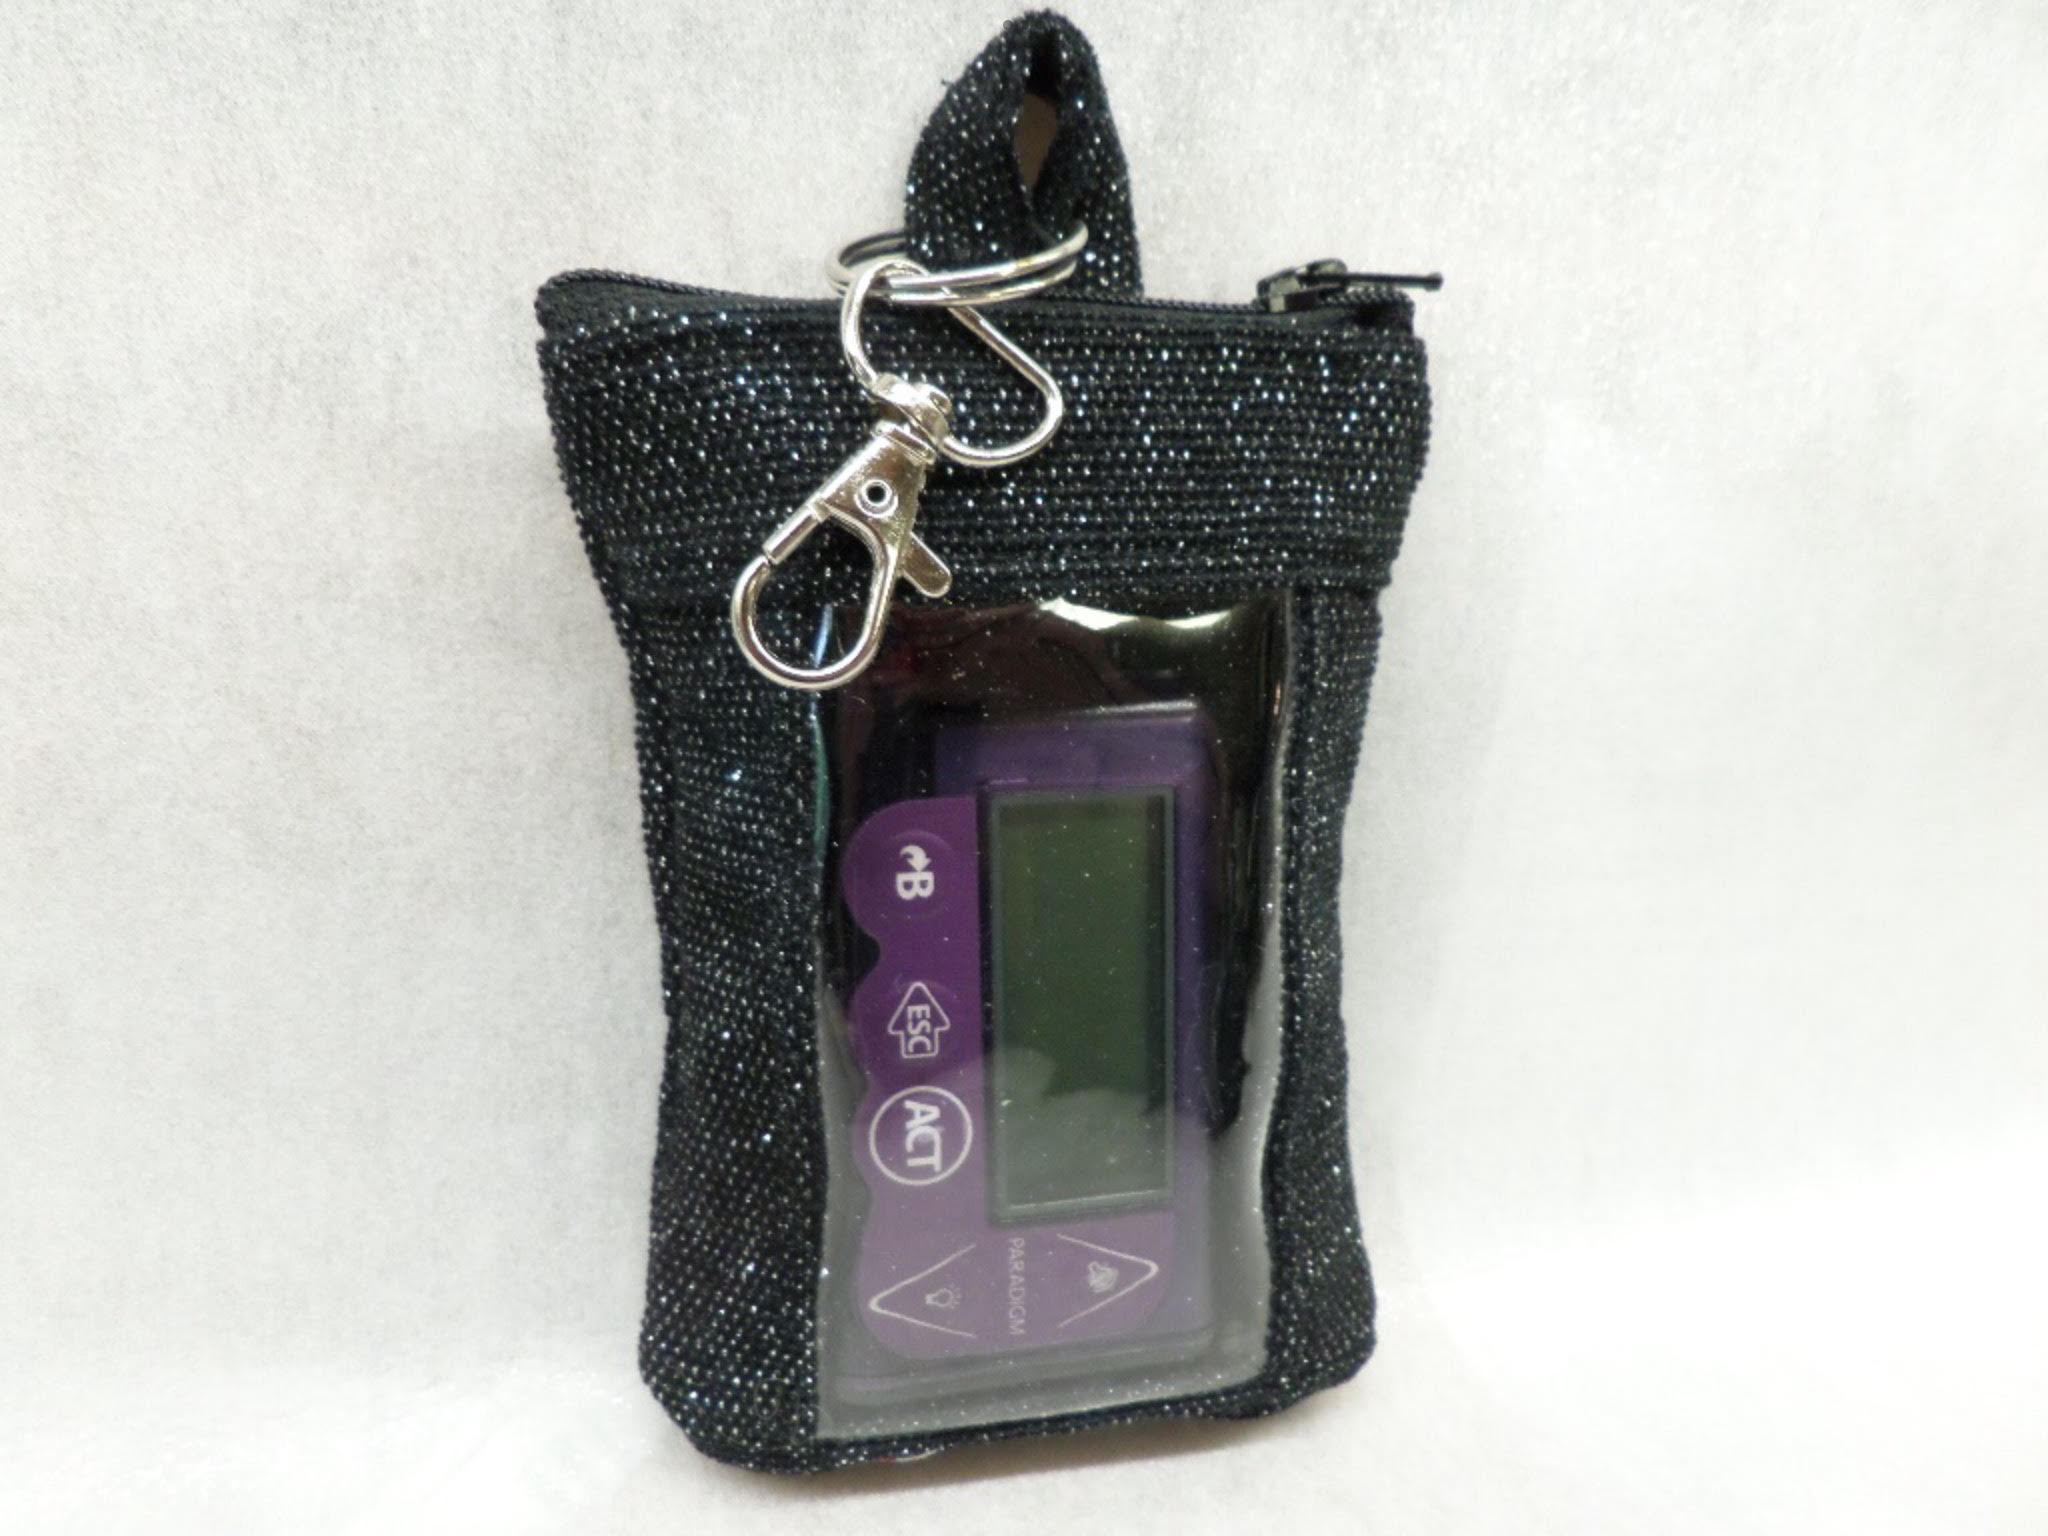 vertical insulin pump pouch with window